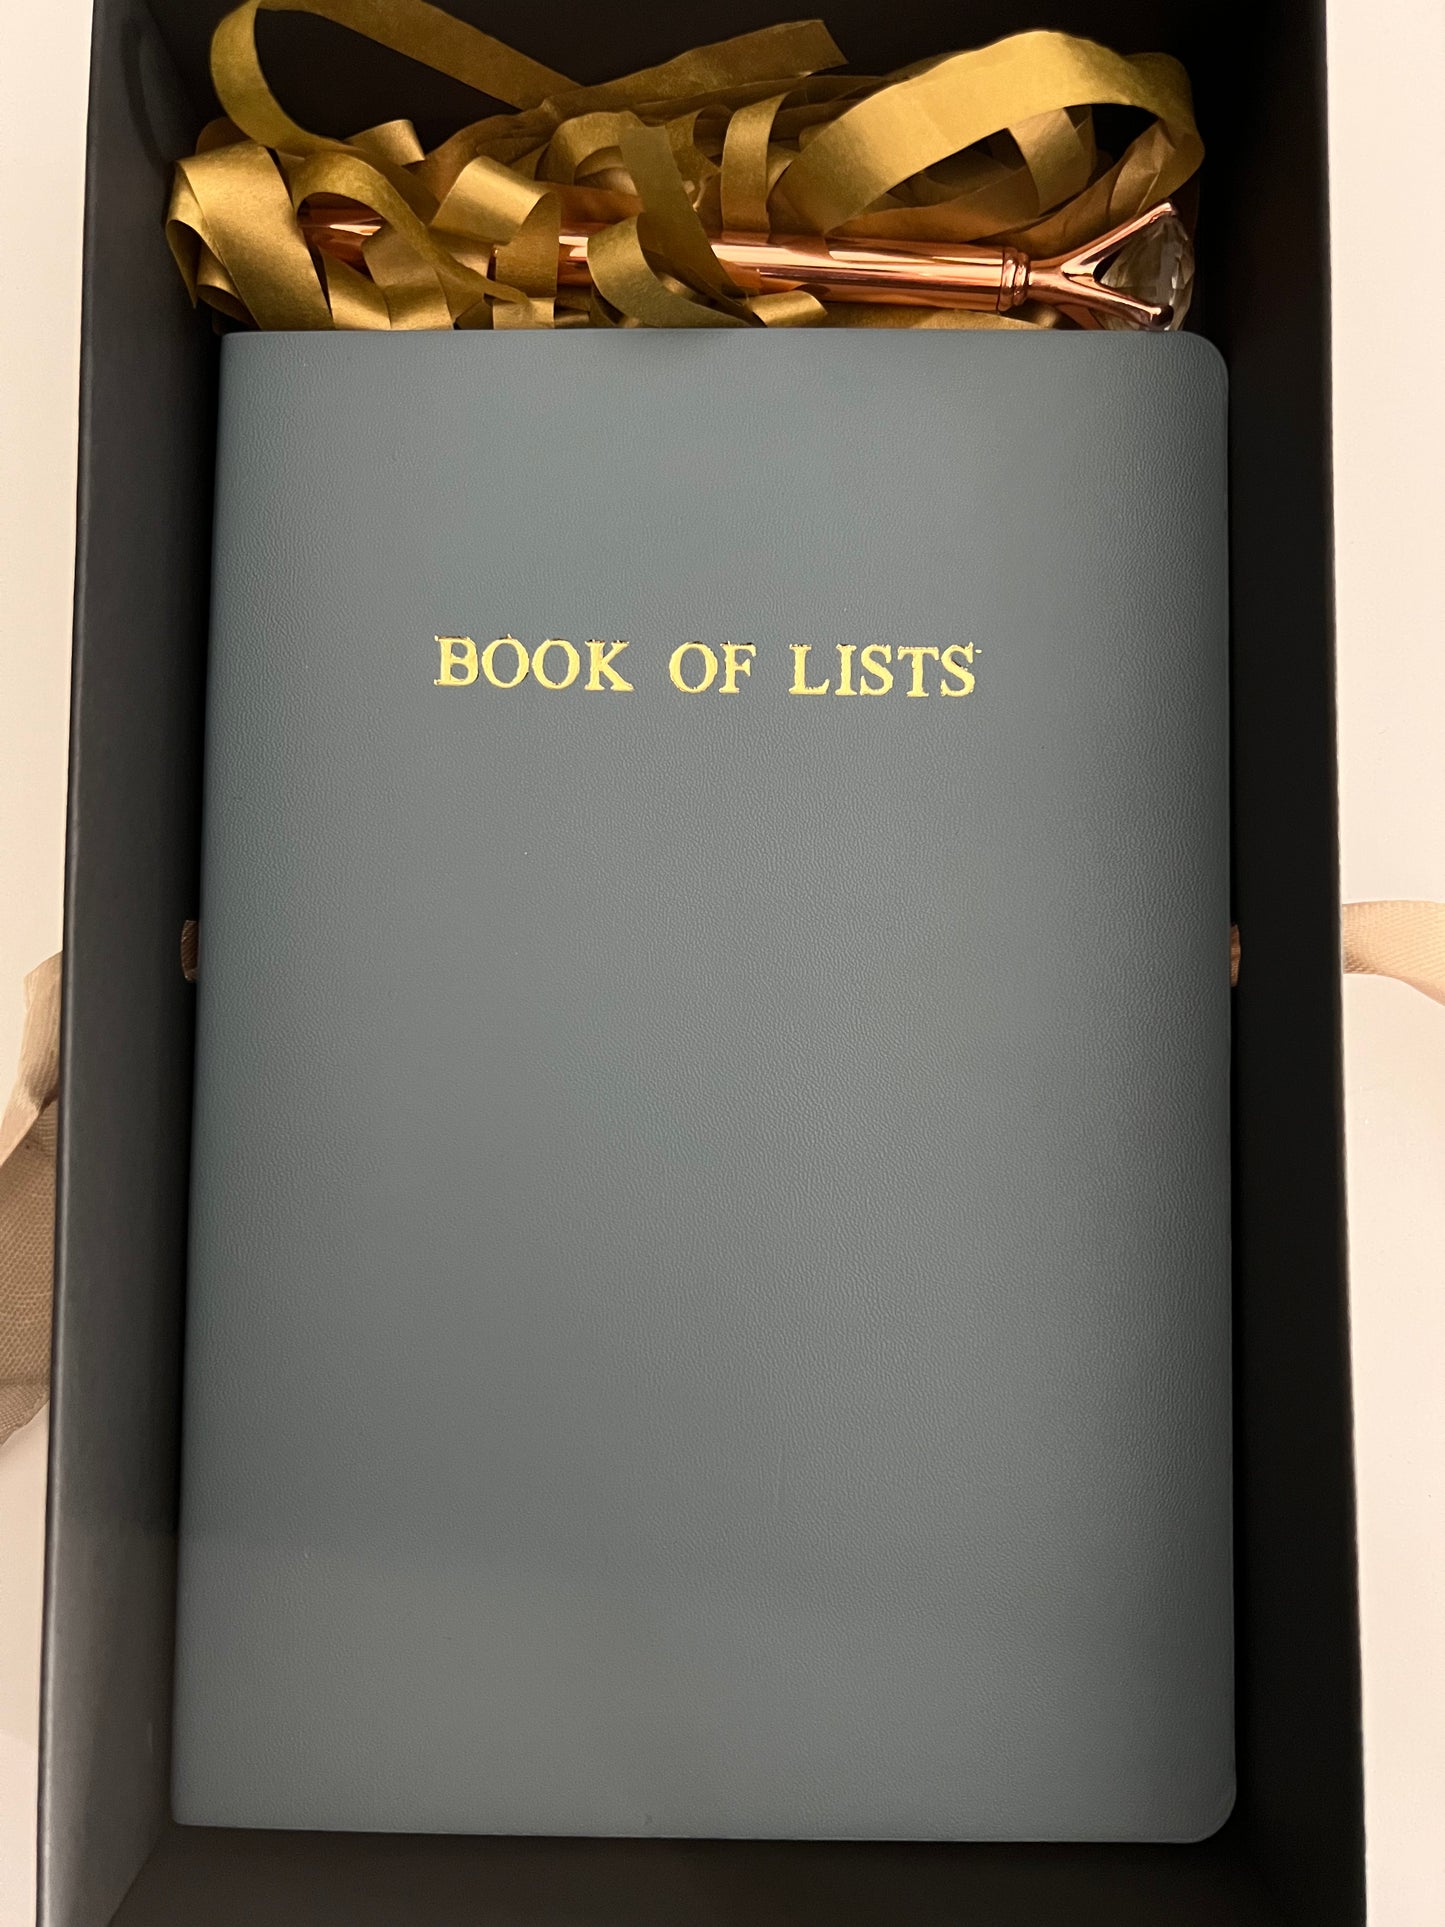 Notebook & Pen - Quote - BOOK OF LISTS